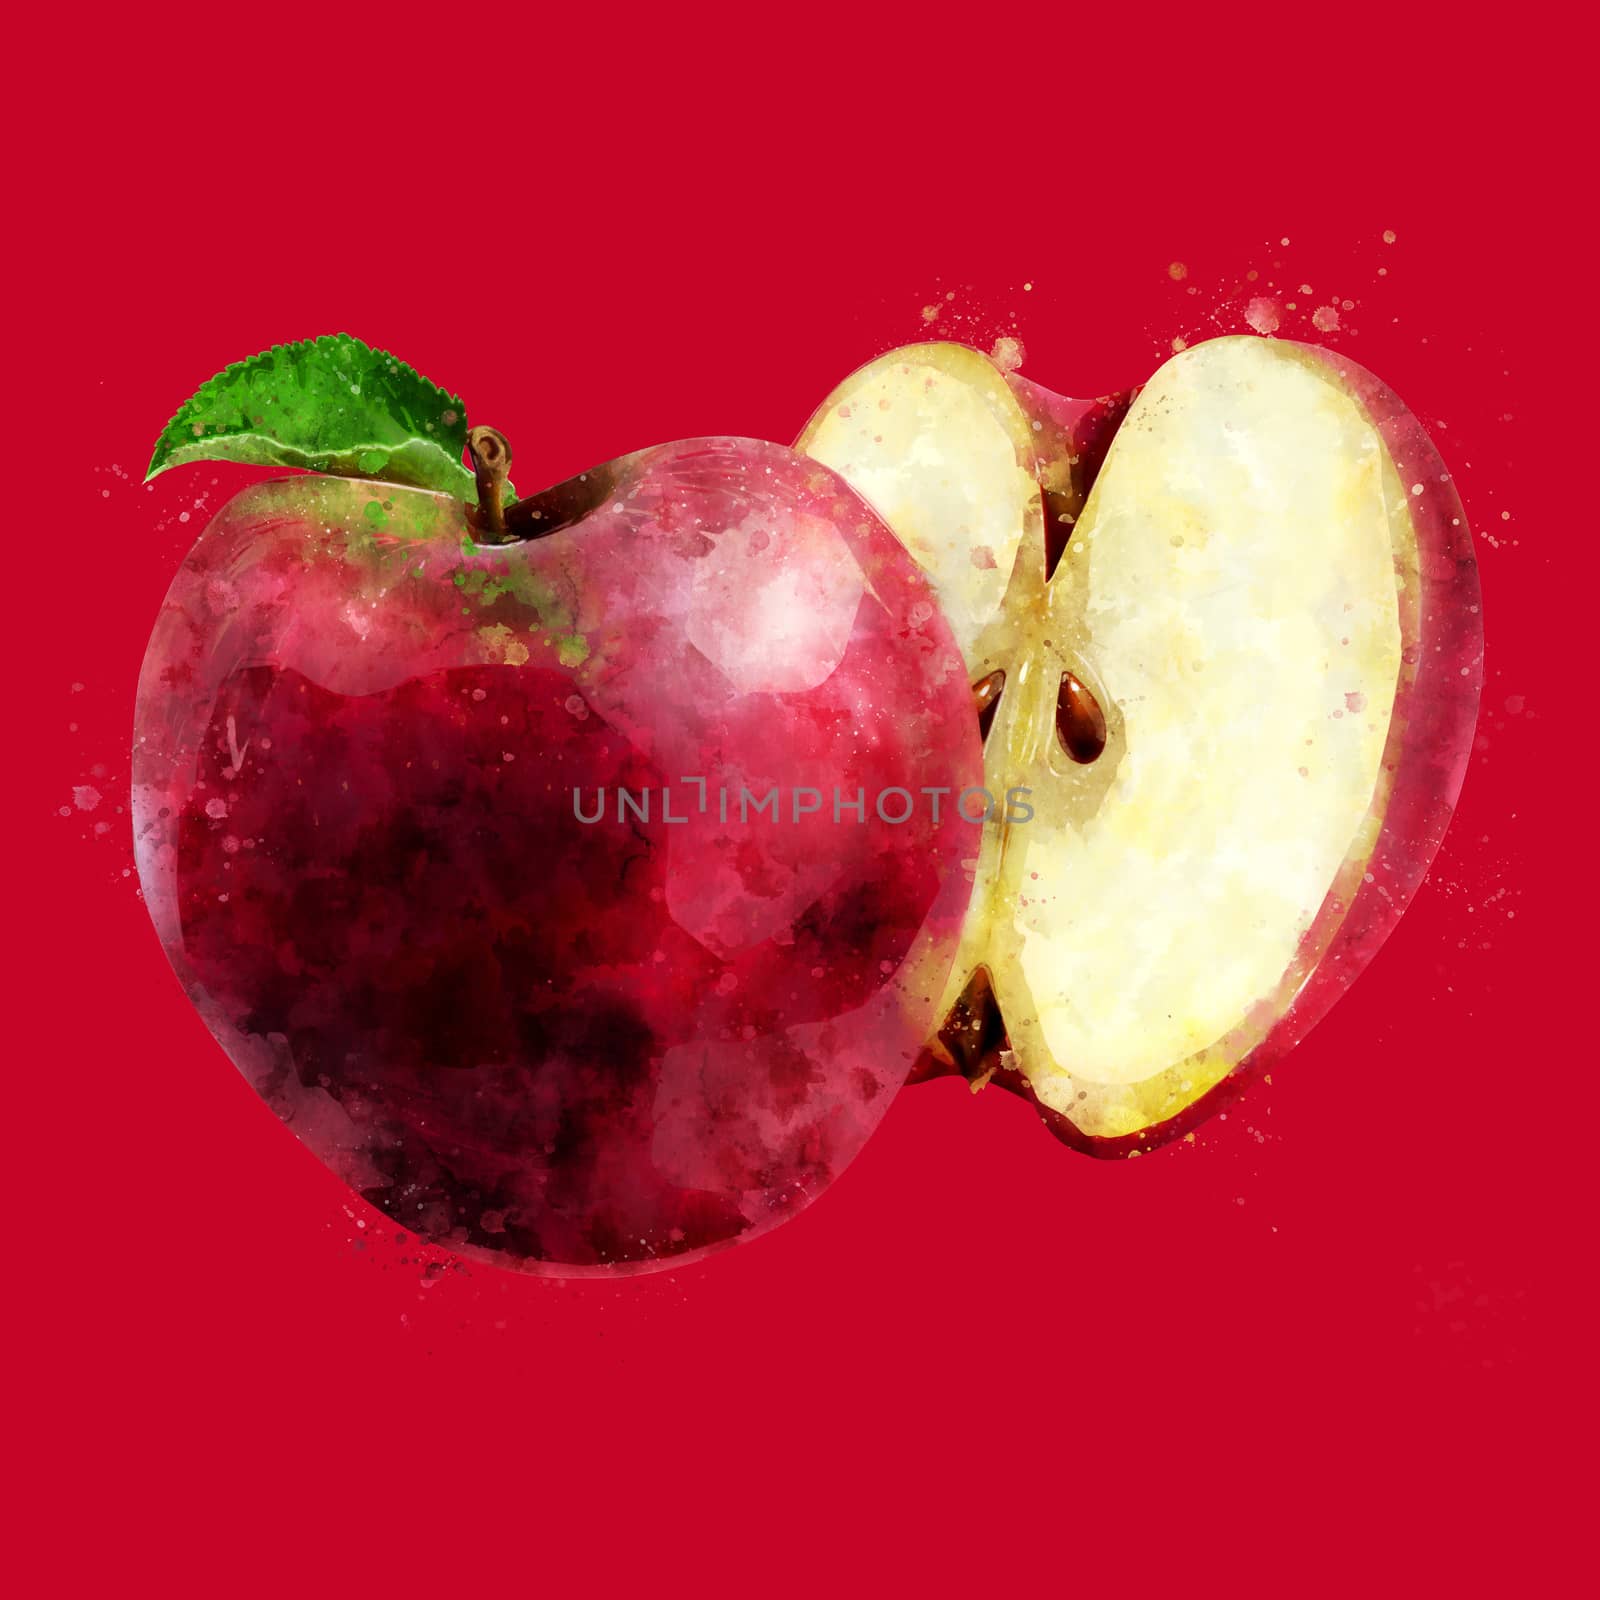 Red Apple, hand-painted illustration on red background